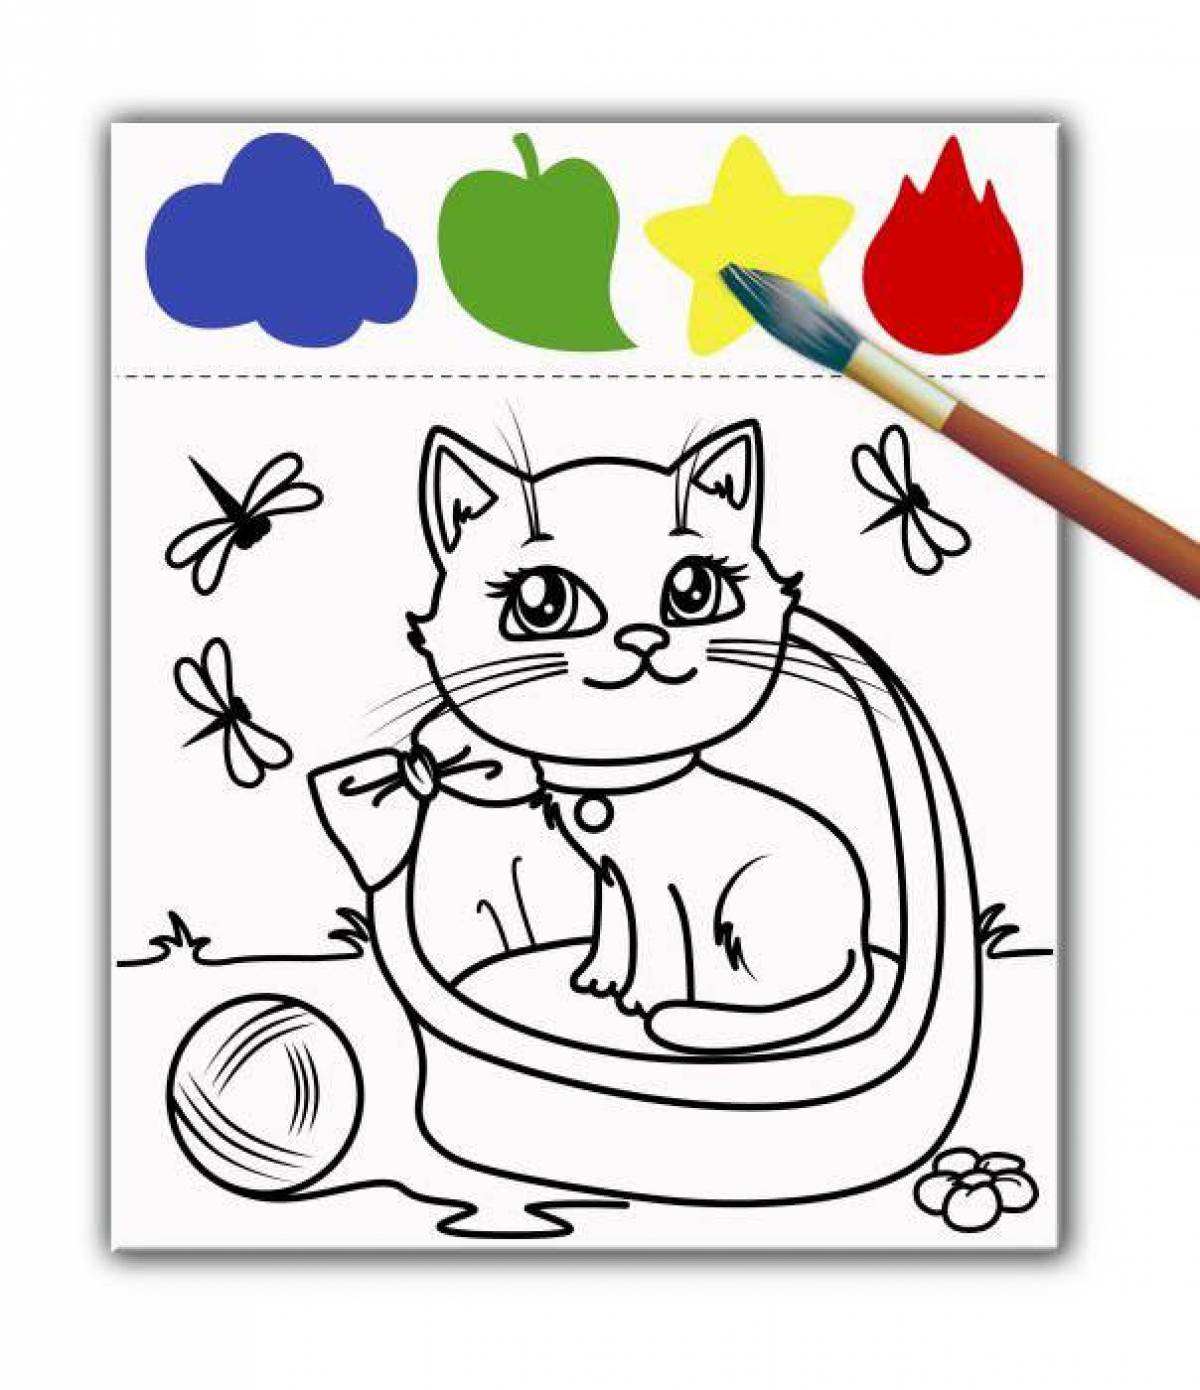 Attractive colors for coloring pages